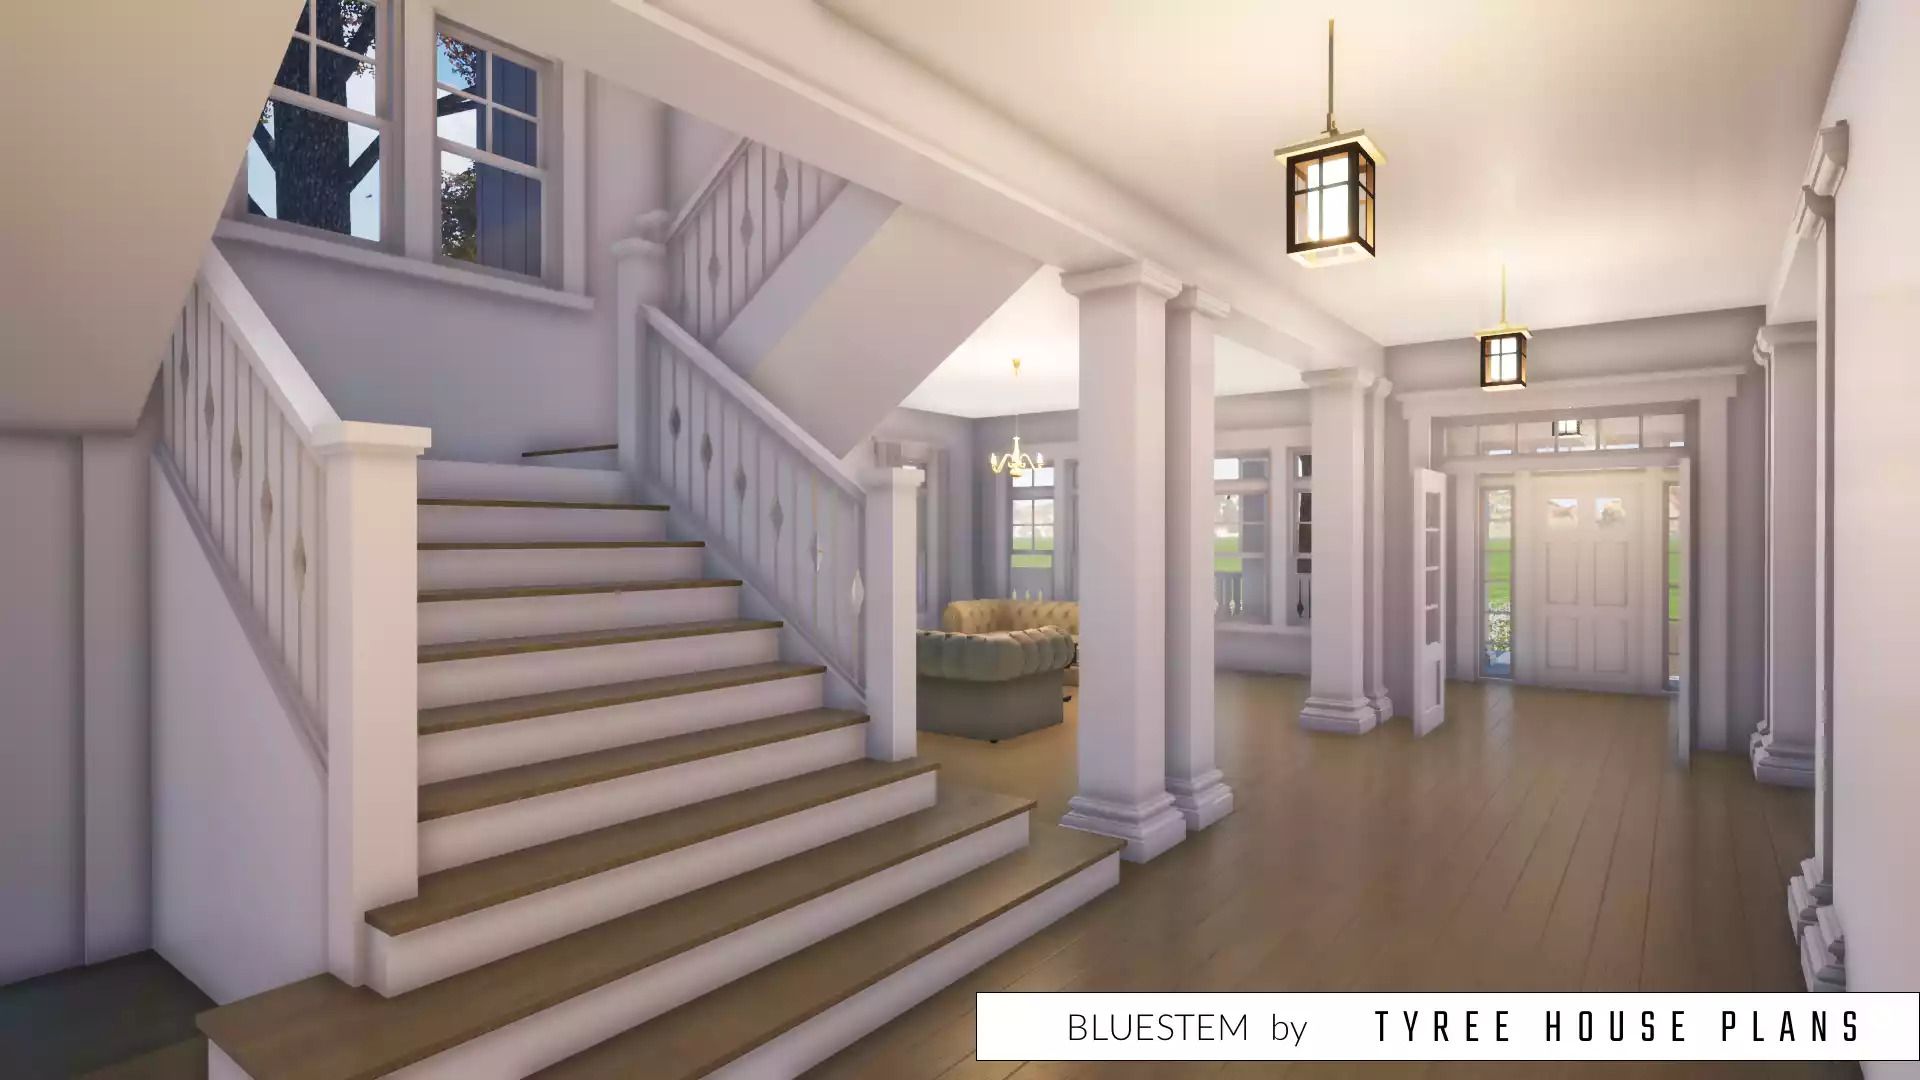 Entry to double stairwell. Bluestem by Tyree House Plans.